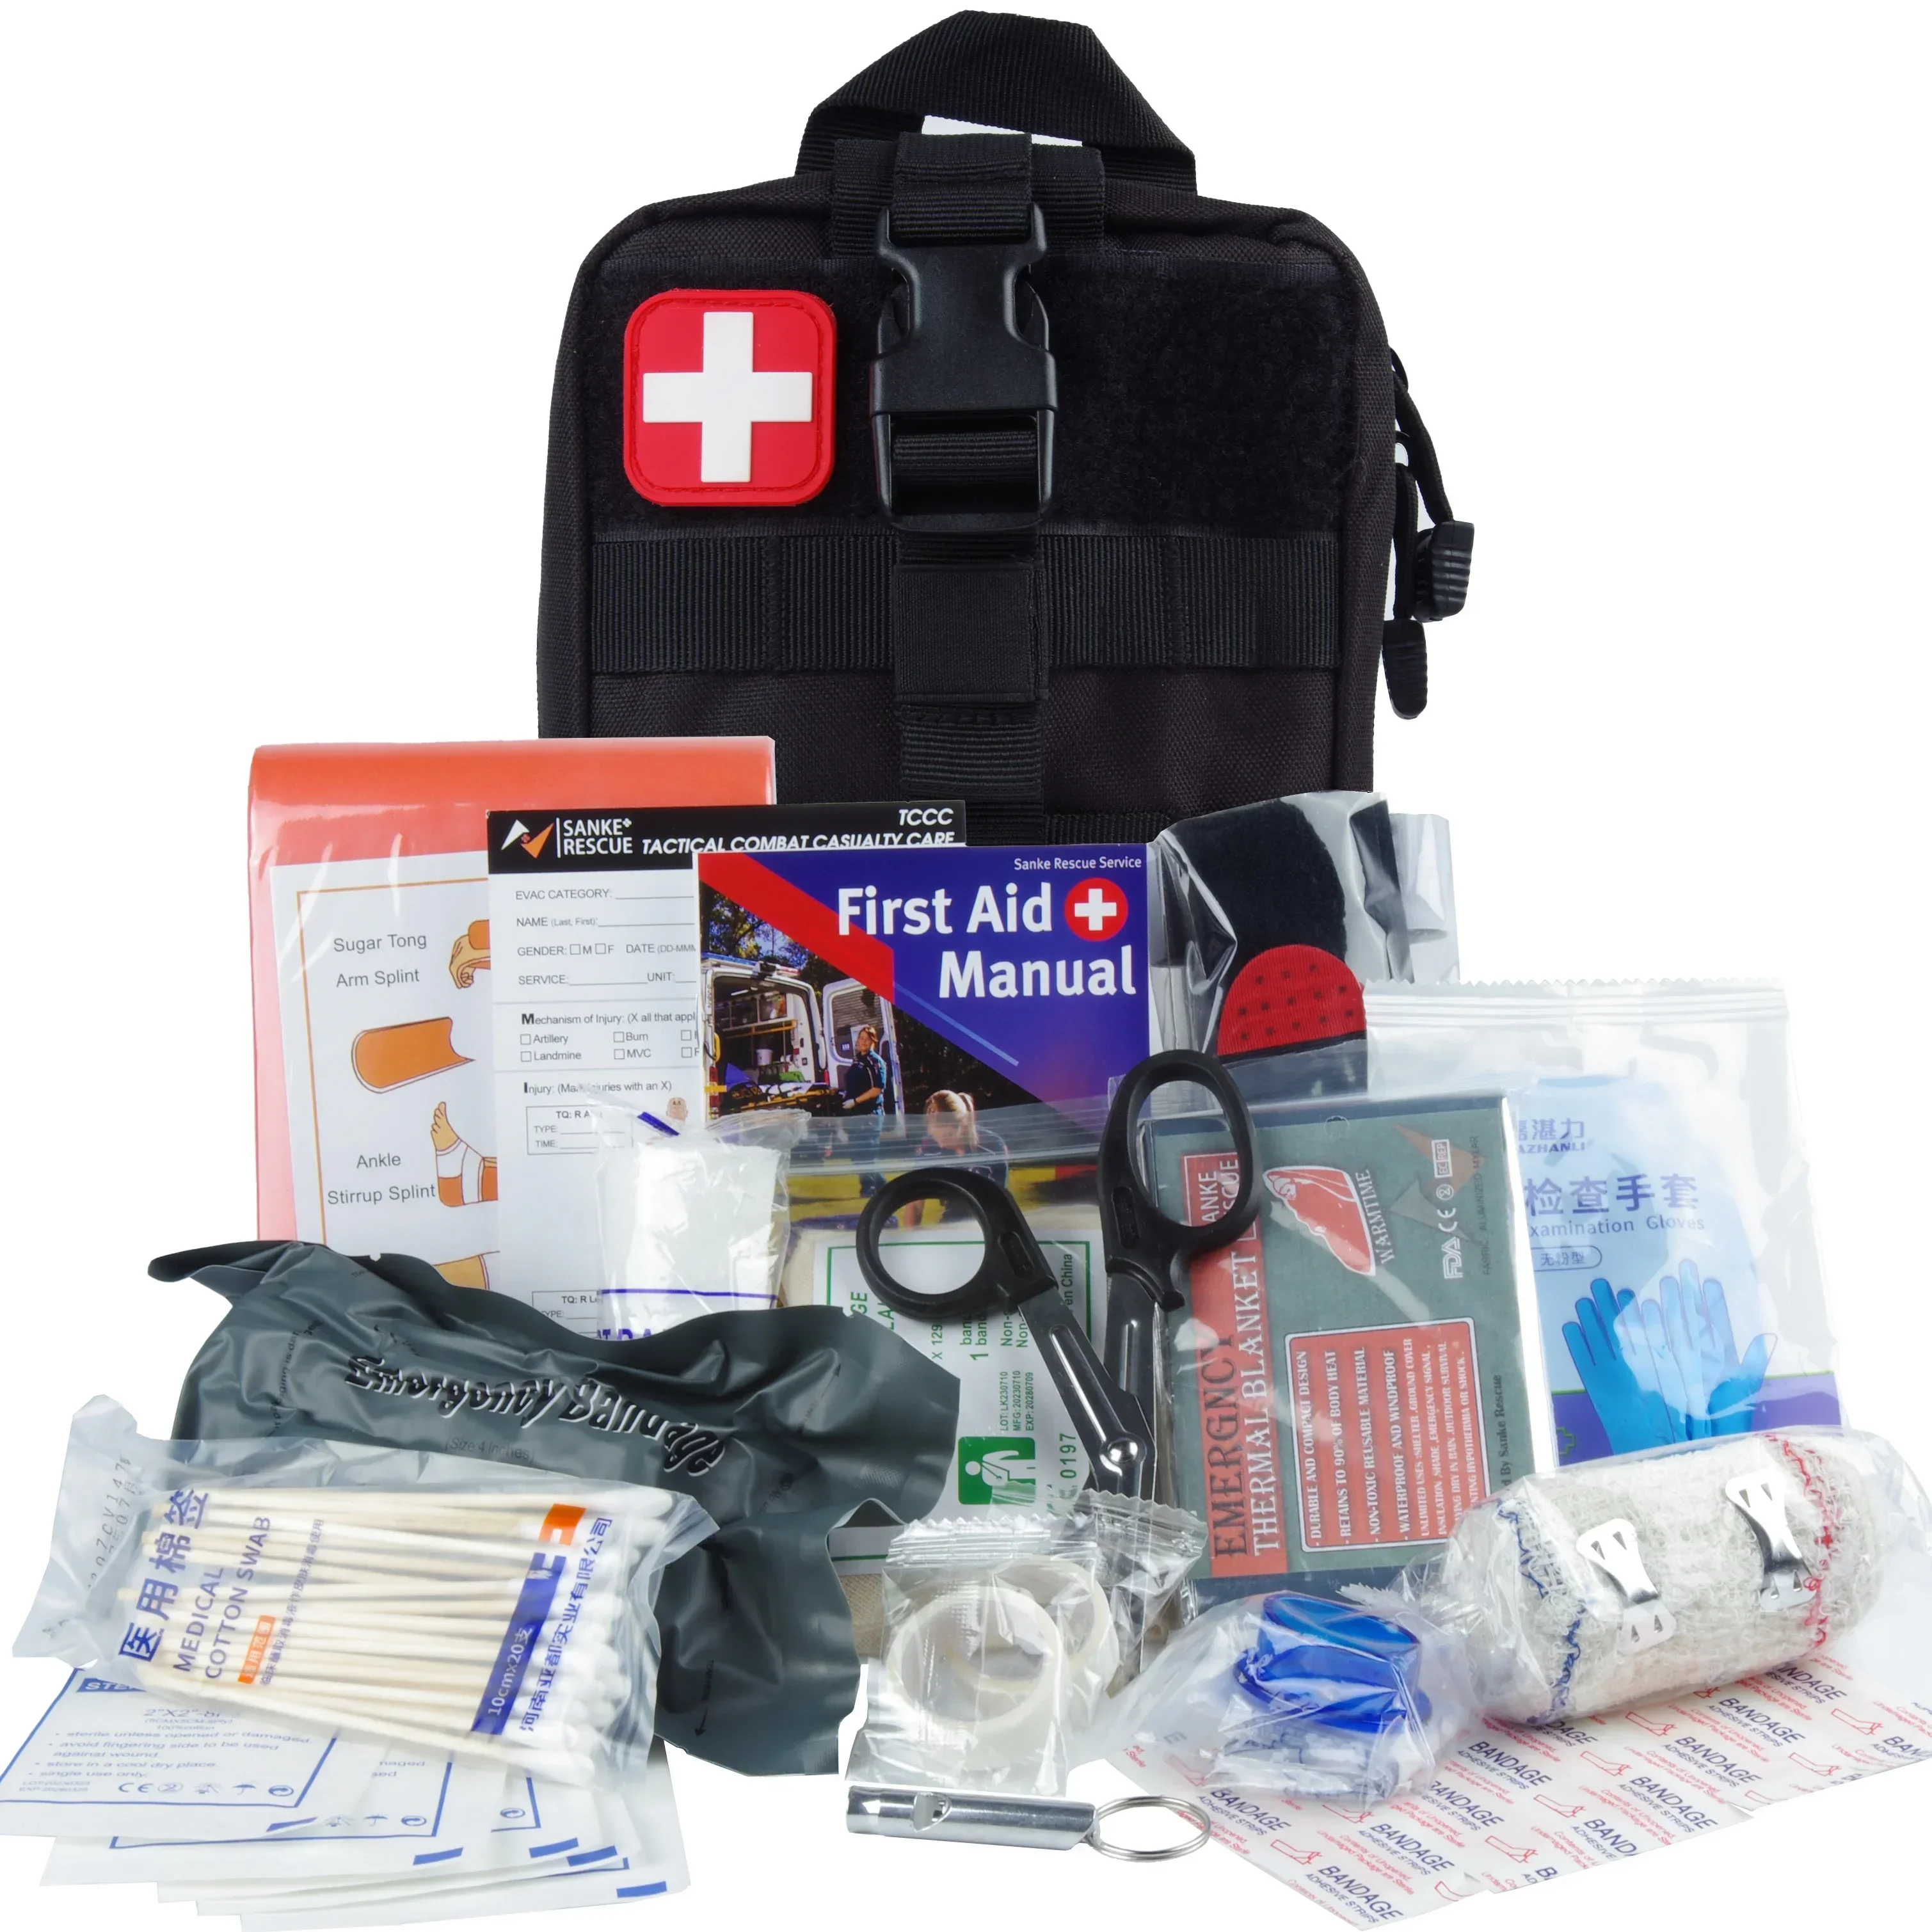 Survival First Aid Kit Survival Military Full Set Molle Outdoor Gear Emergency - £37.11 GBP